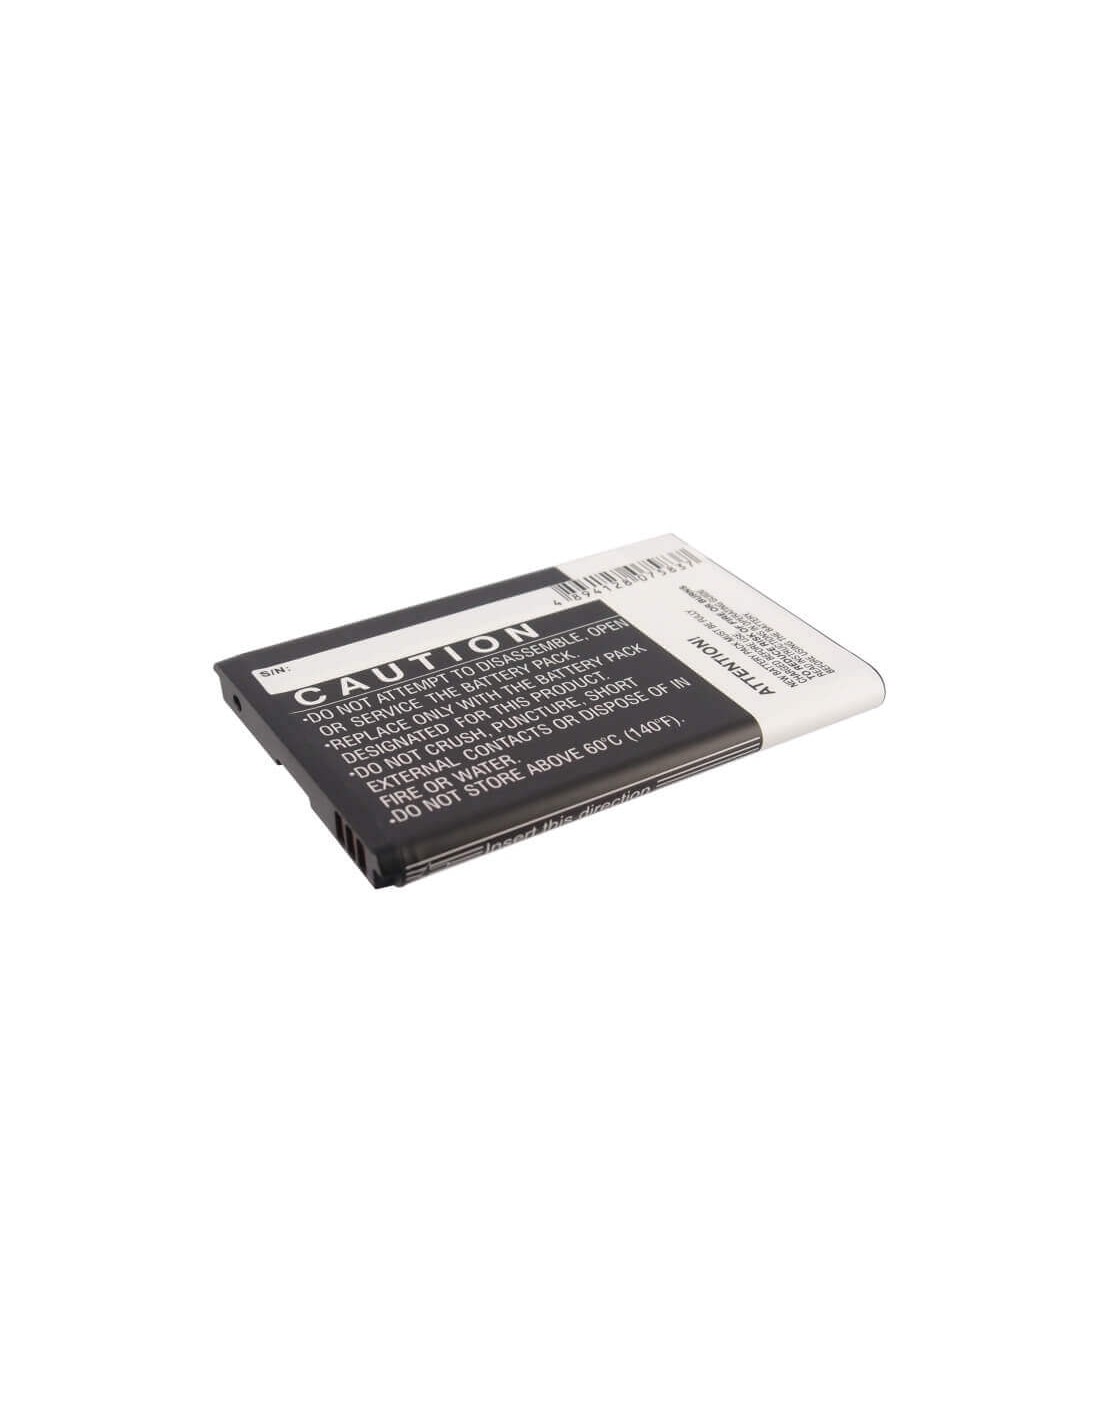 Battery for Zte Authentic, Eufi890, Mf63 3.7V, 1750mAh - 6.48Wh